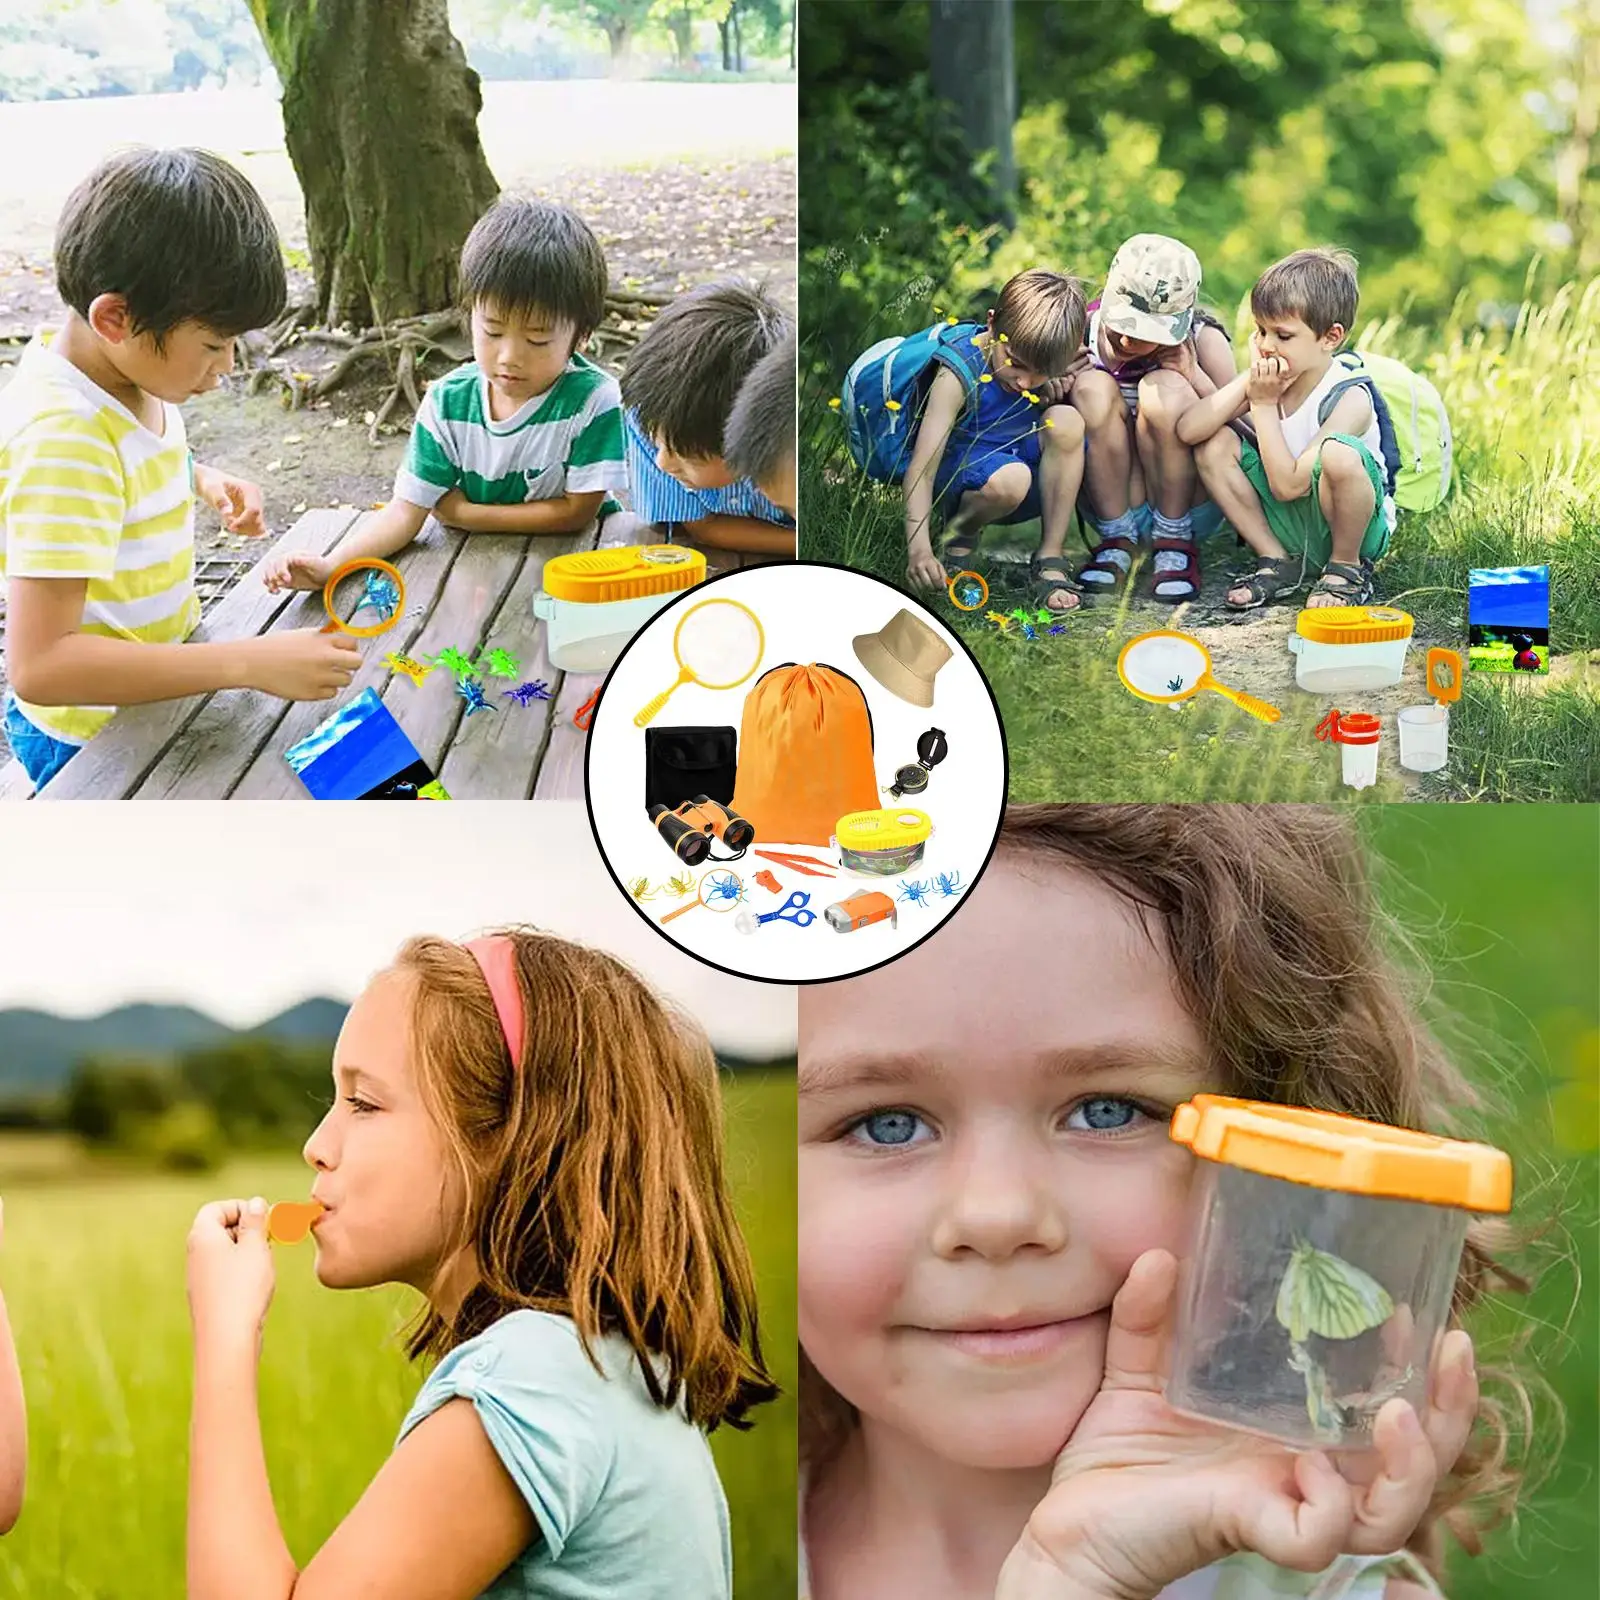 21x Nature Exploration Kit Science Educational Playset Educational Toys Hat Outdoor Explorer Bug Collection for 3-12 Years Old